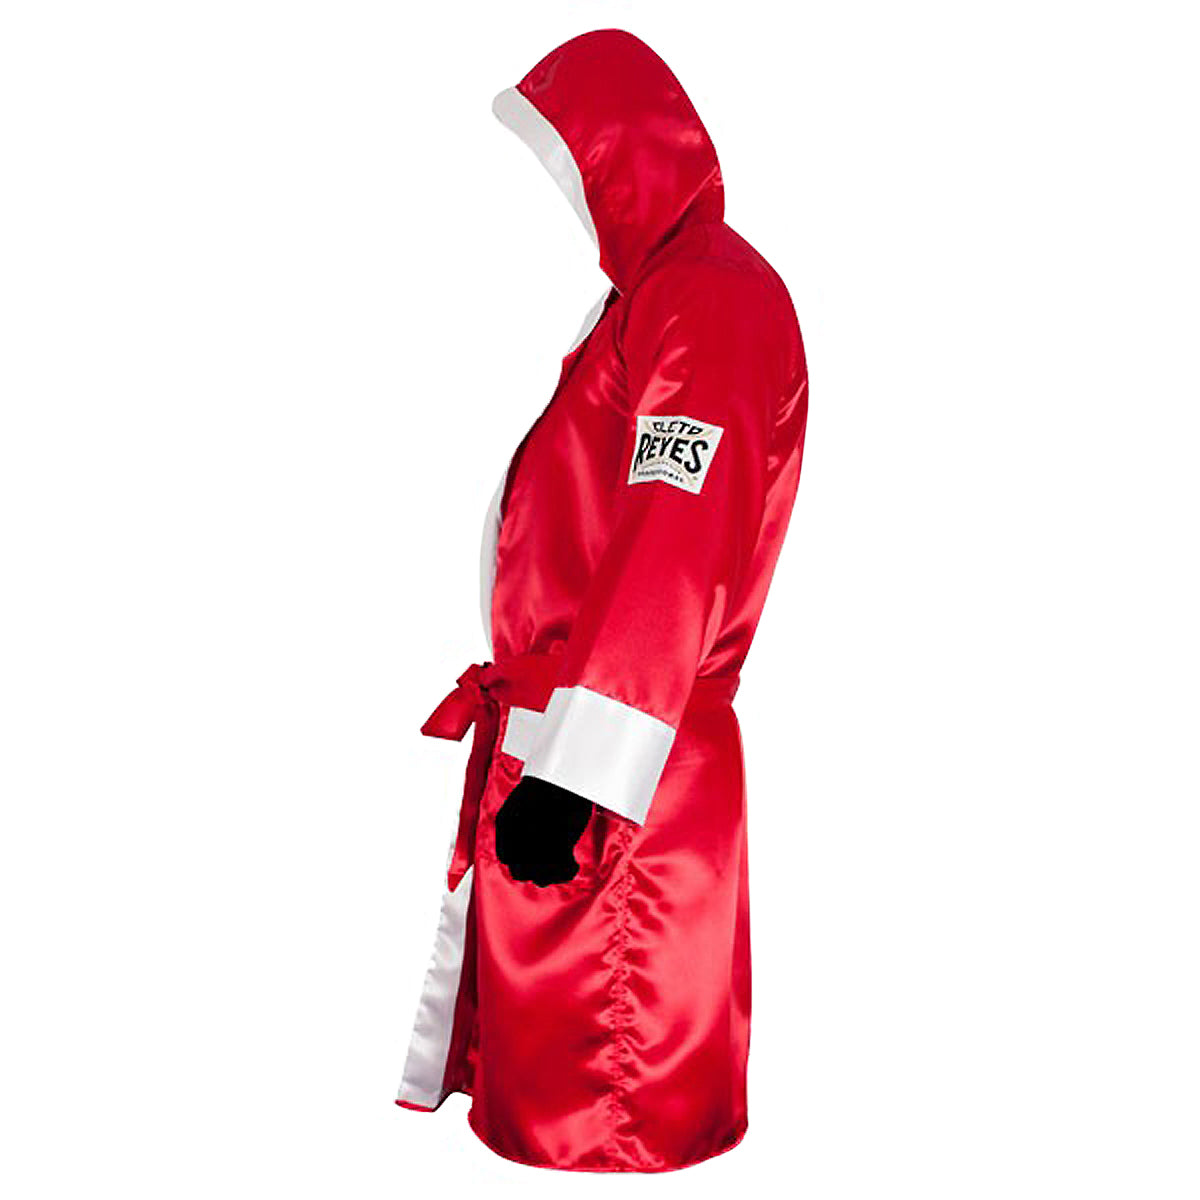 Cleto Reyes Satin Boxing Robe with Hood - Small - Red/White Cleto Reyes